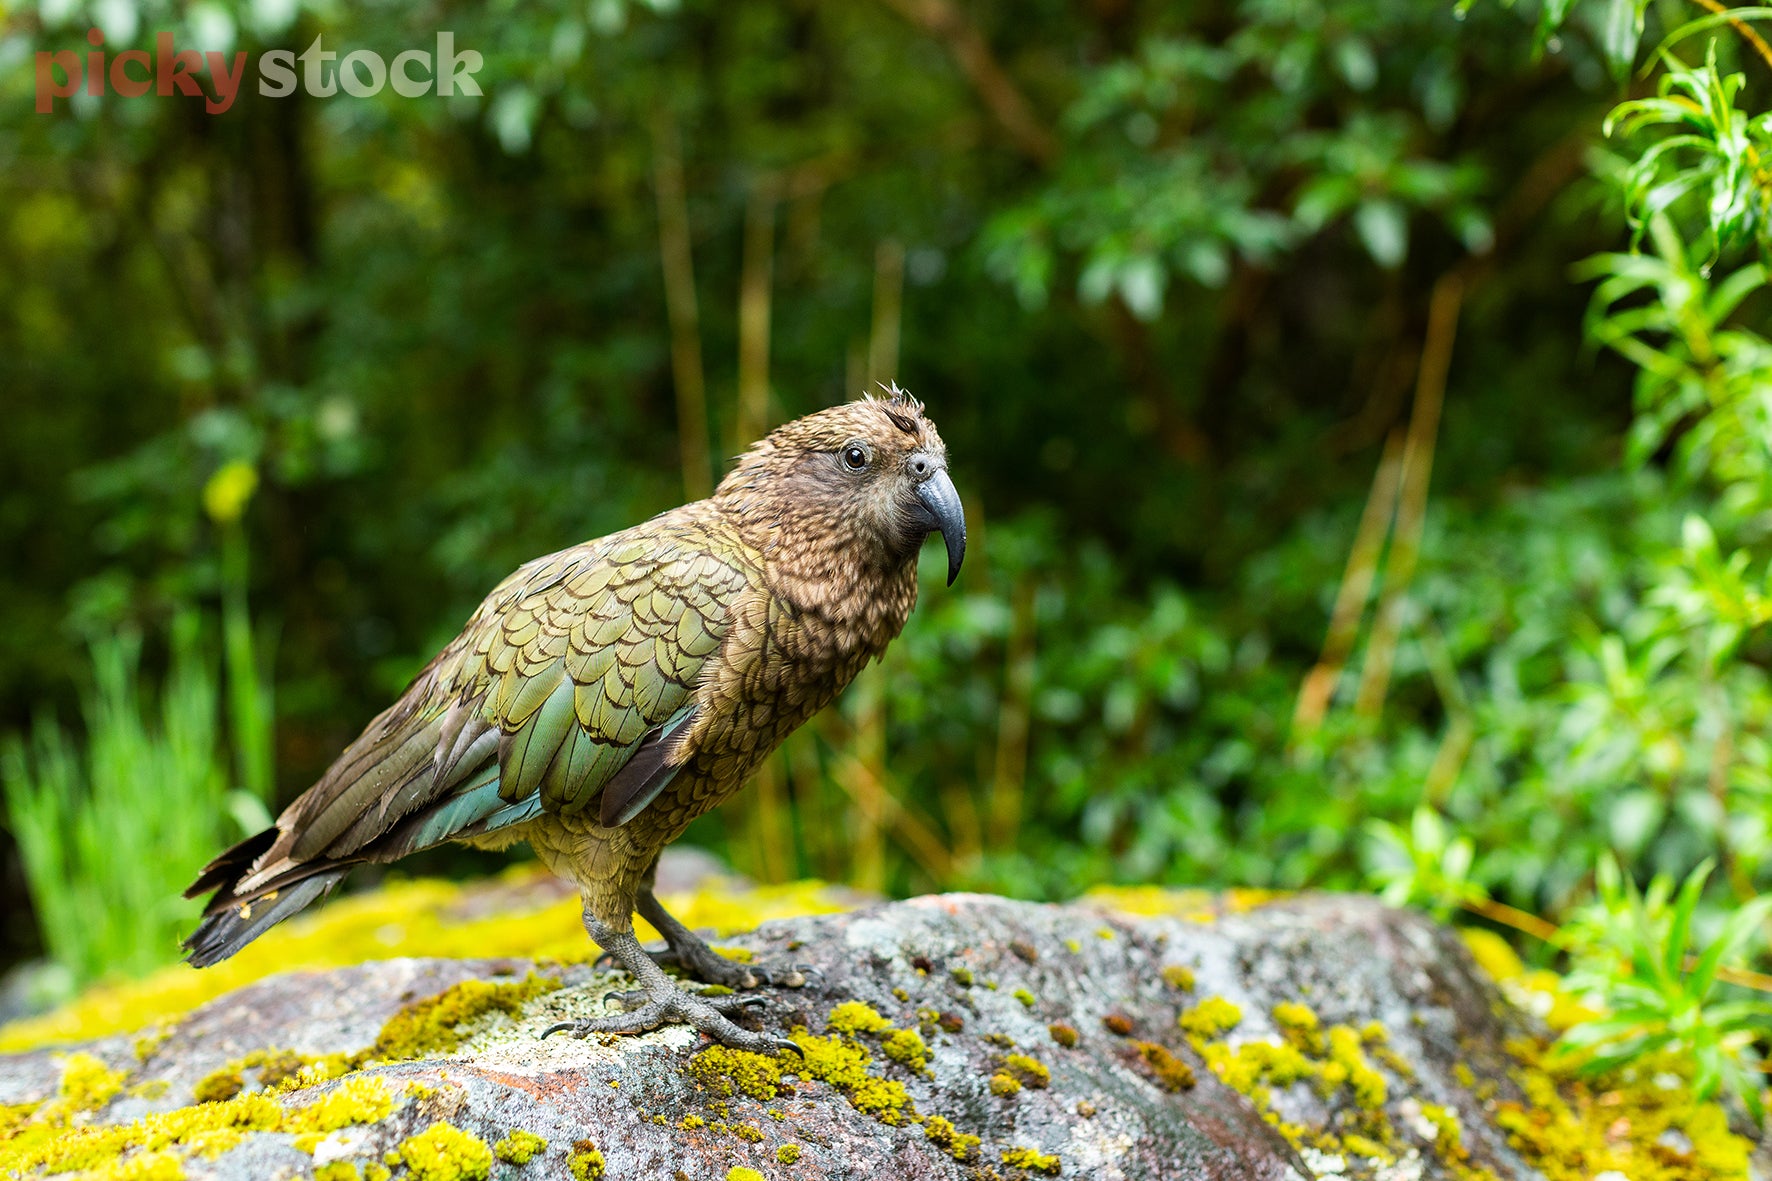 Kea bird standing on mossy rock looks direct to camera. Bright green dense bush and scrubs in background.  